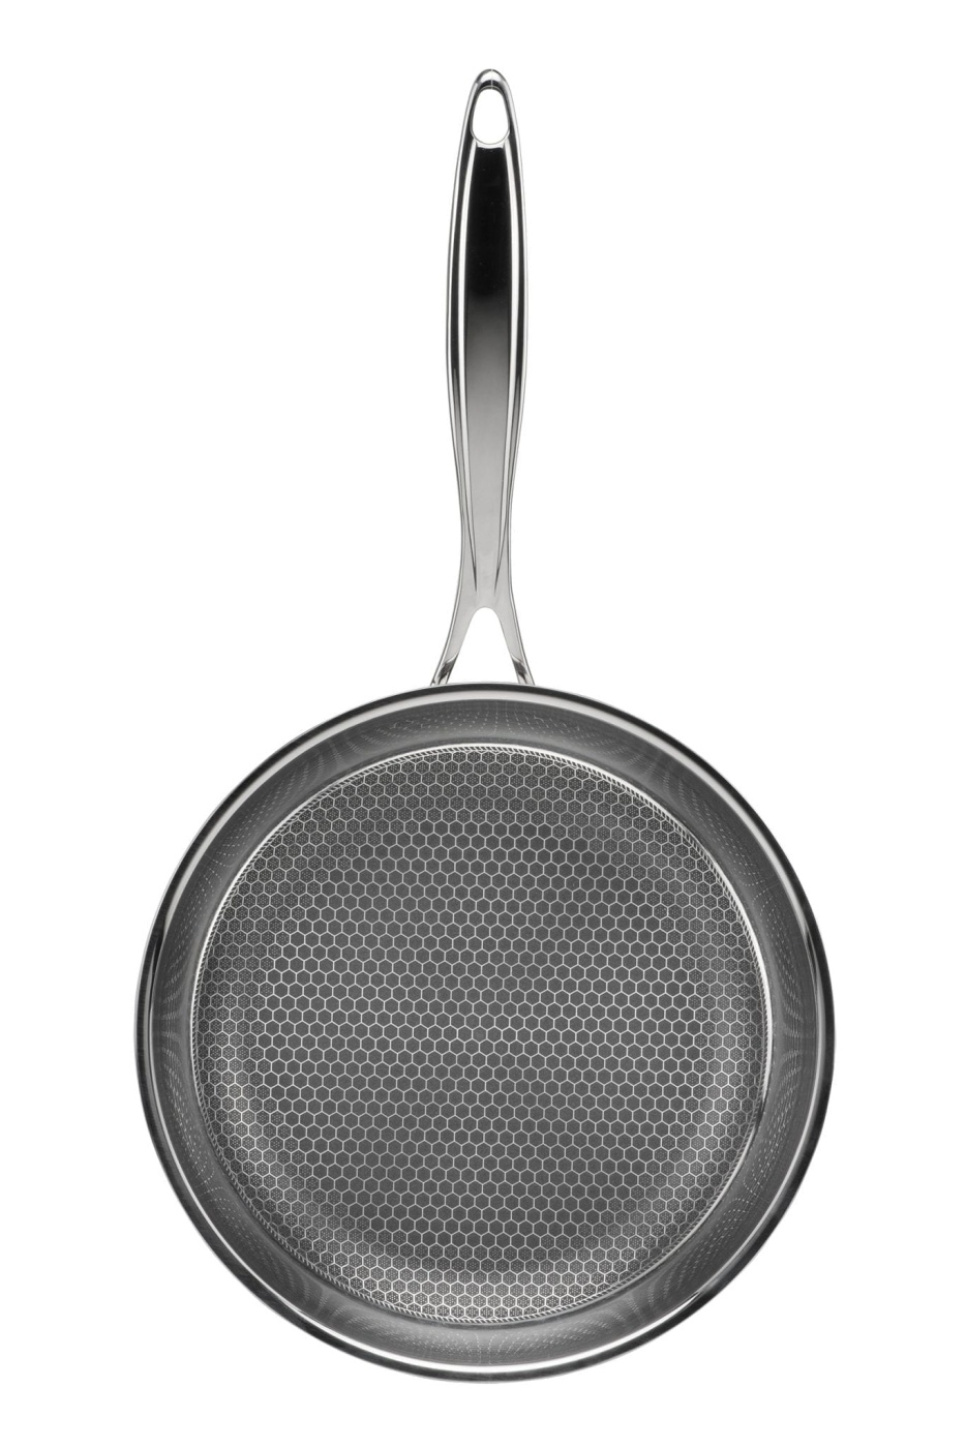 Frying pan, Steelsafe Pro - Heirol in the group Cooking / Frying pan / Frying pans at KitchenLab (1786-18032)